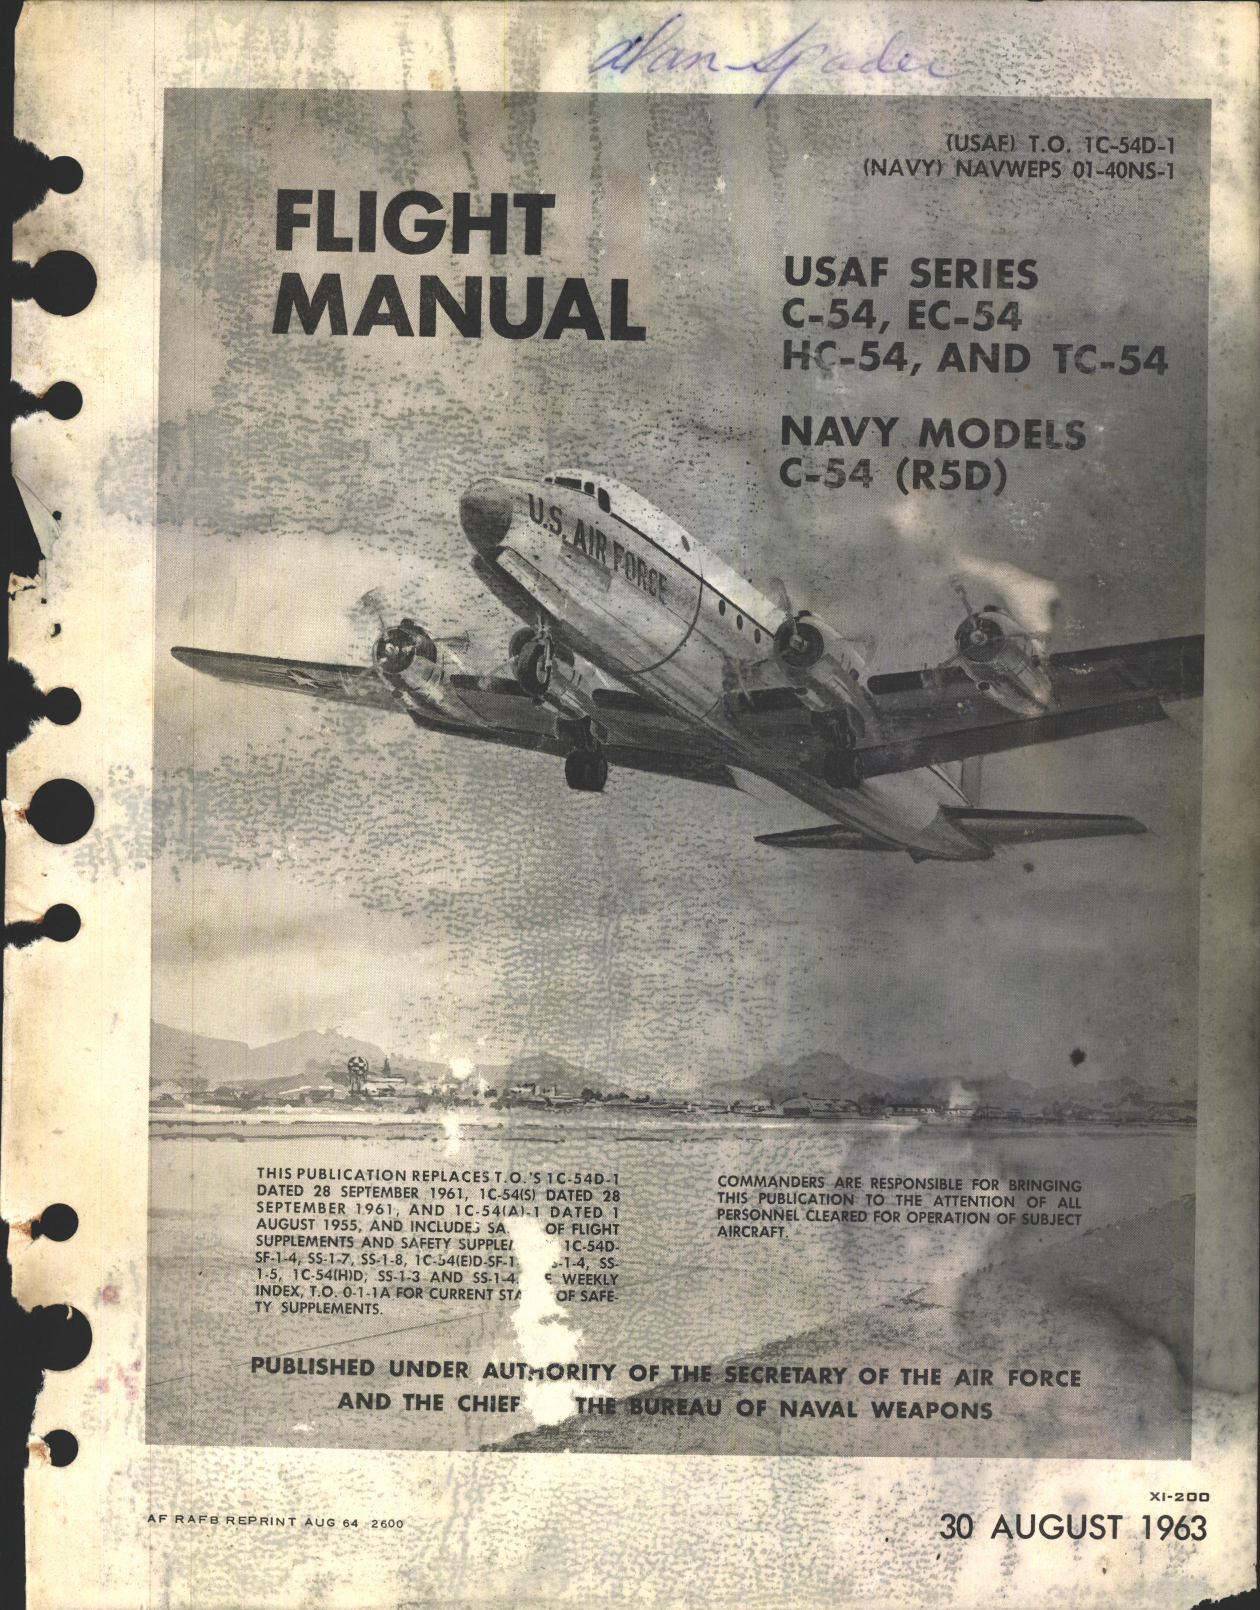 Sample page 1 from AirCorps Library document: Flight Manual for C-54, EC-54, HC-54, TC-54, and R5D